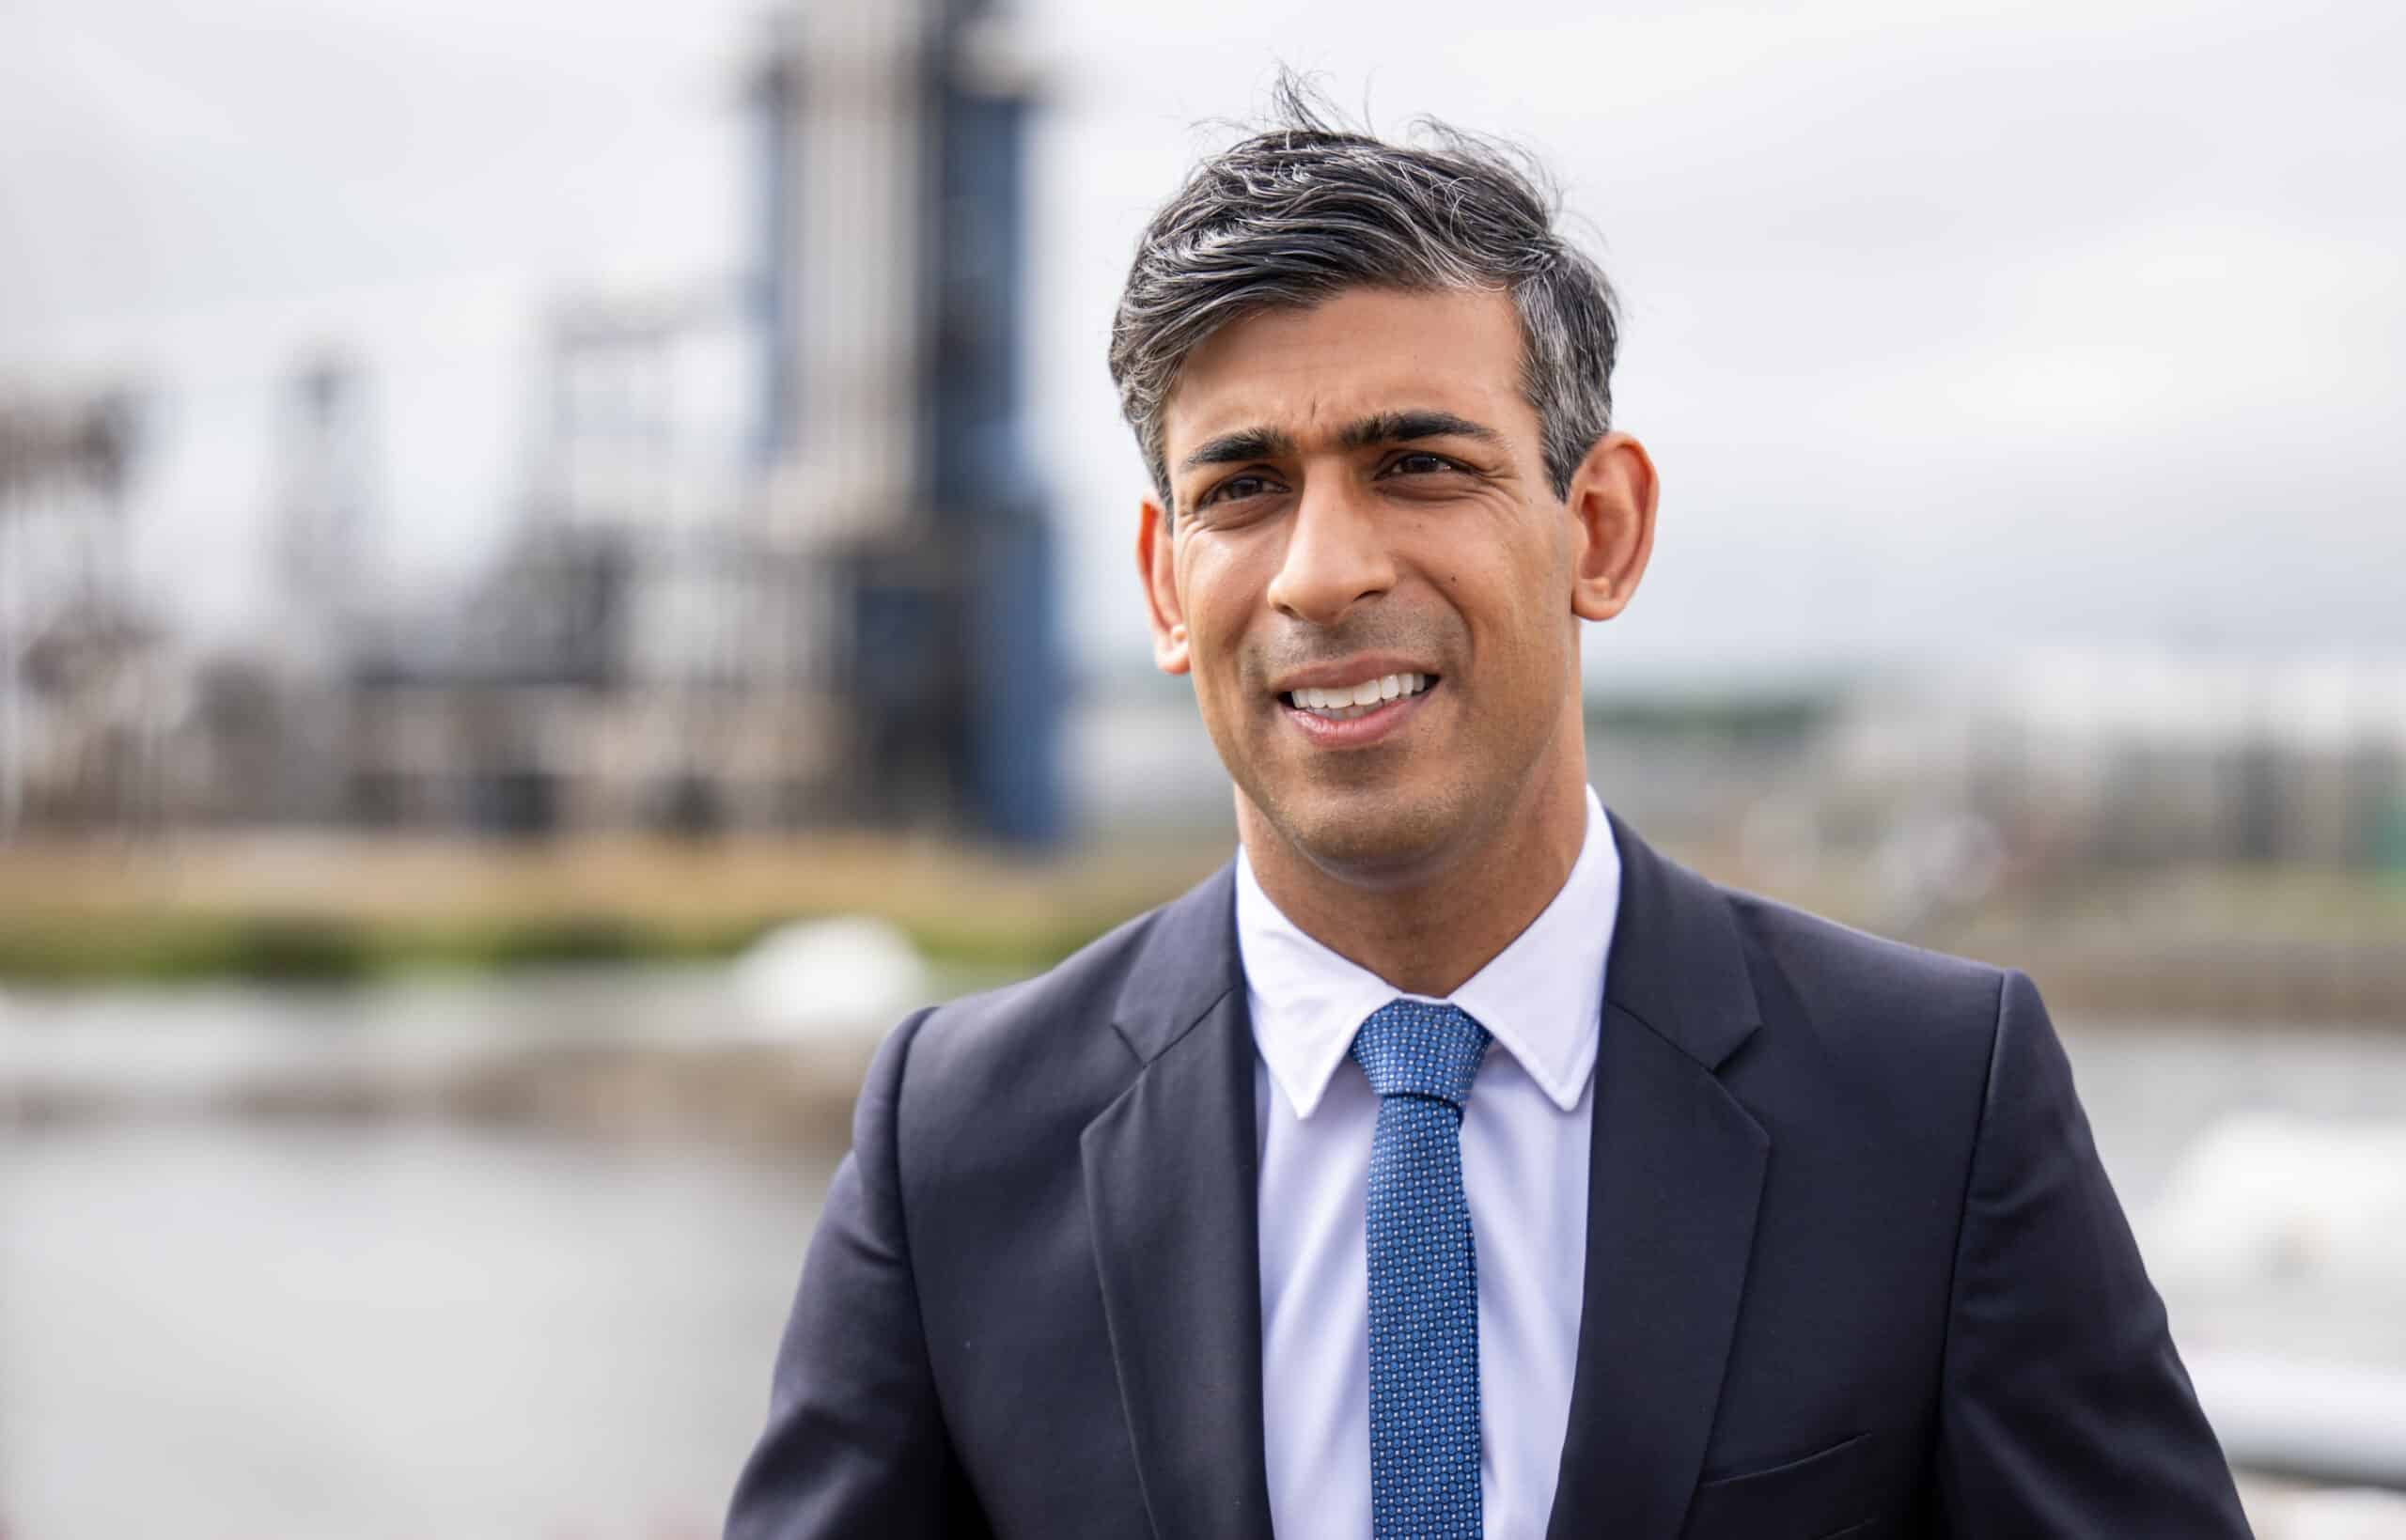 Sunak unable to guarantee he will stop small boats by next election